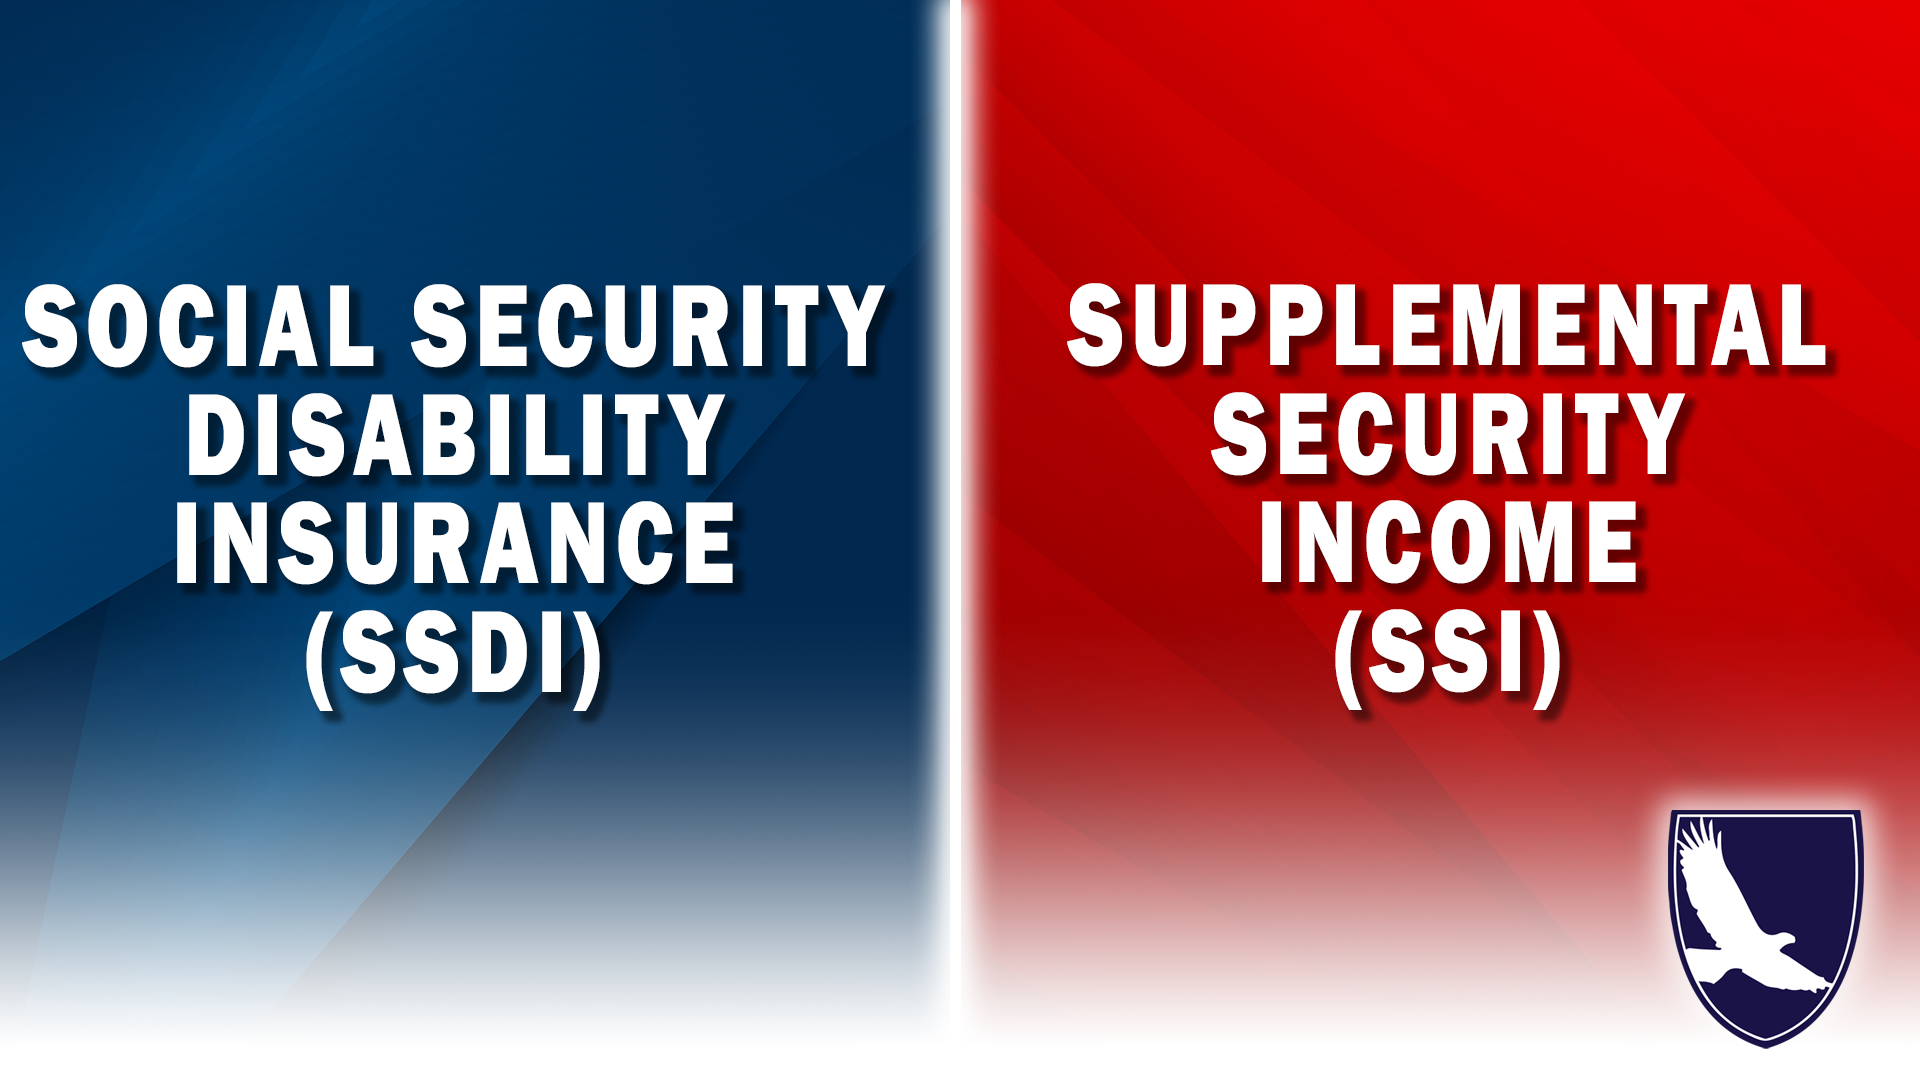 SOCIAL SECURITY DISABILITY INSURANCE VS. SUPPLEMENTAL SECURITY INCOME